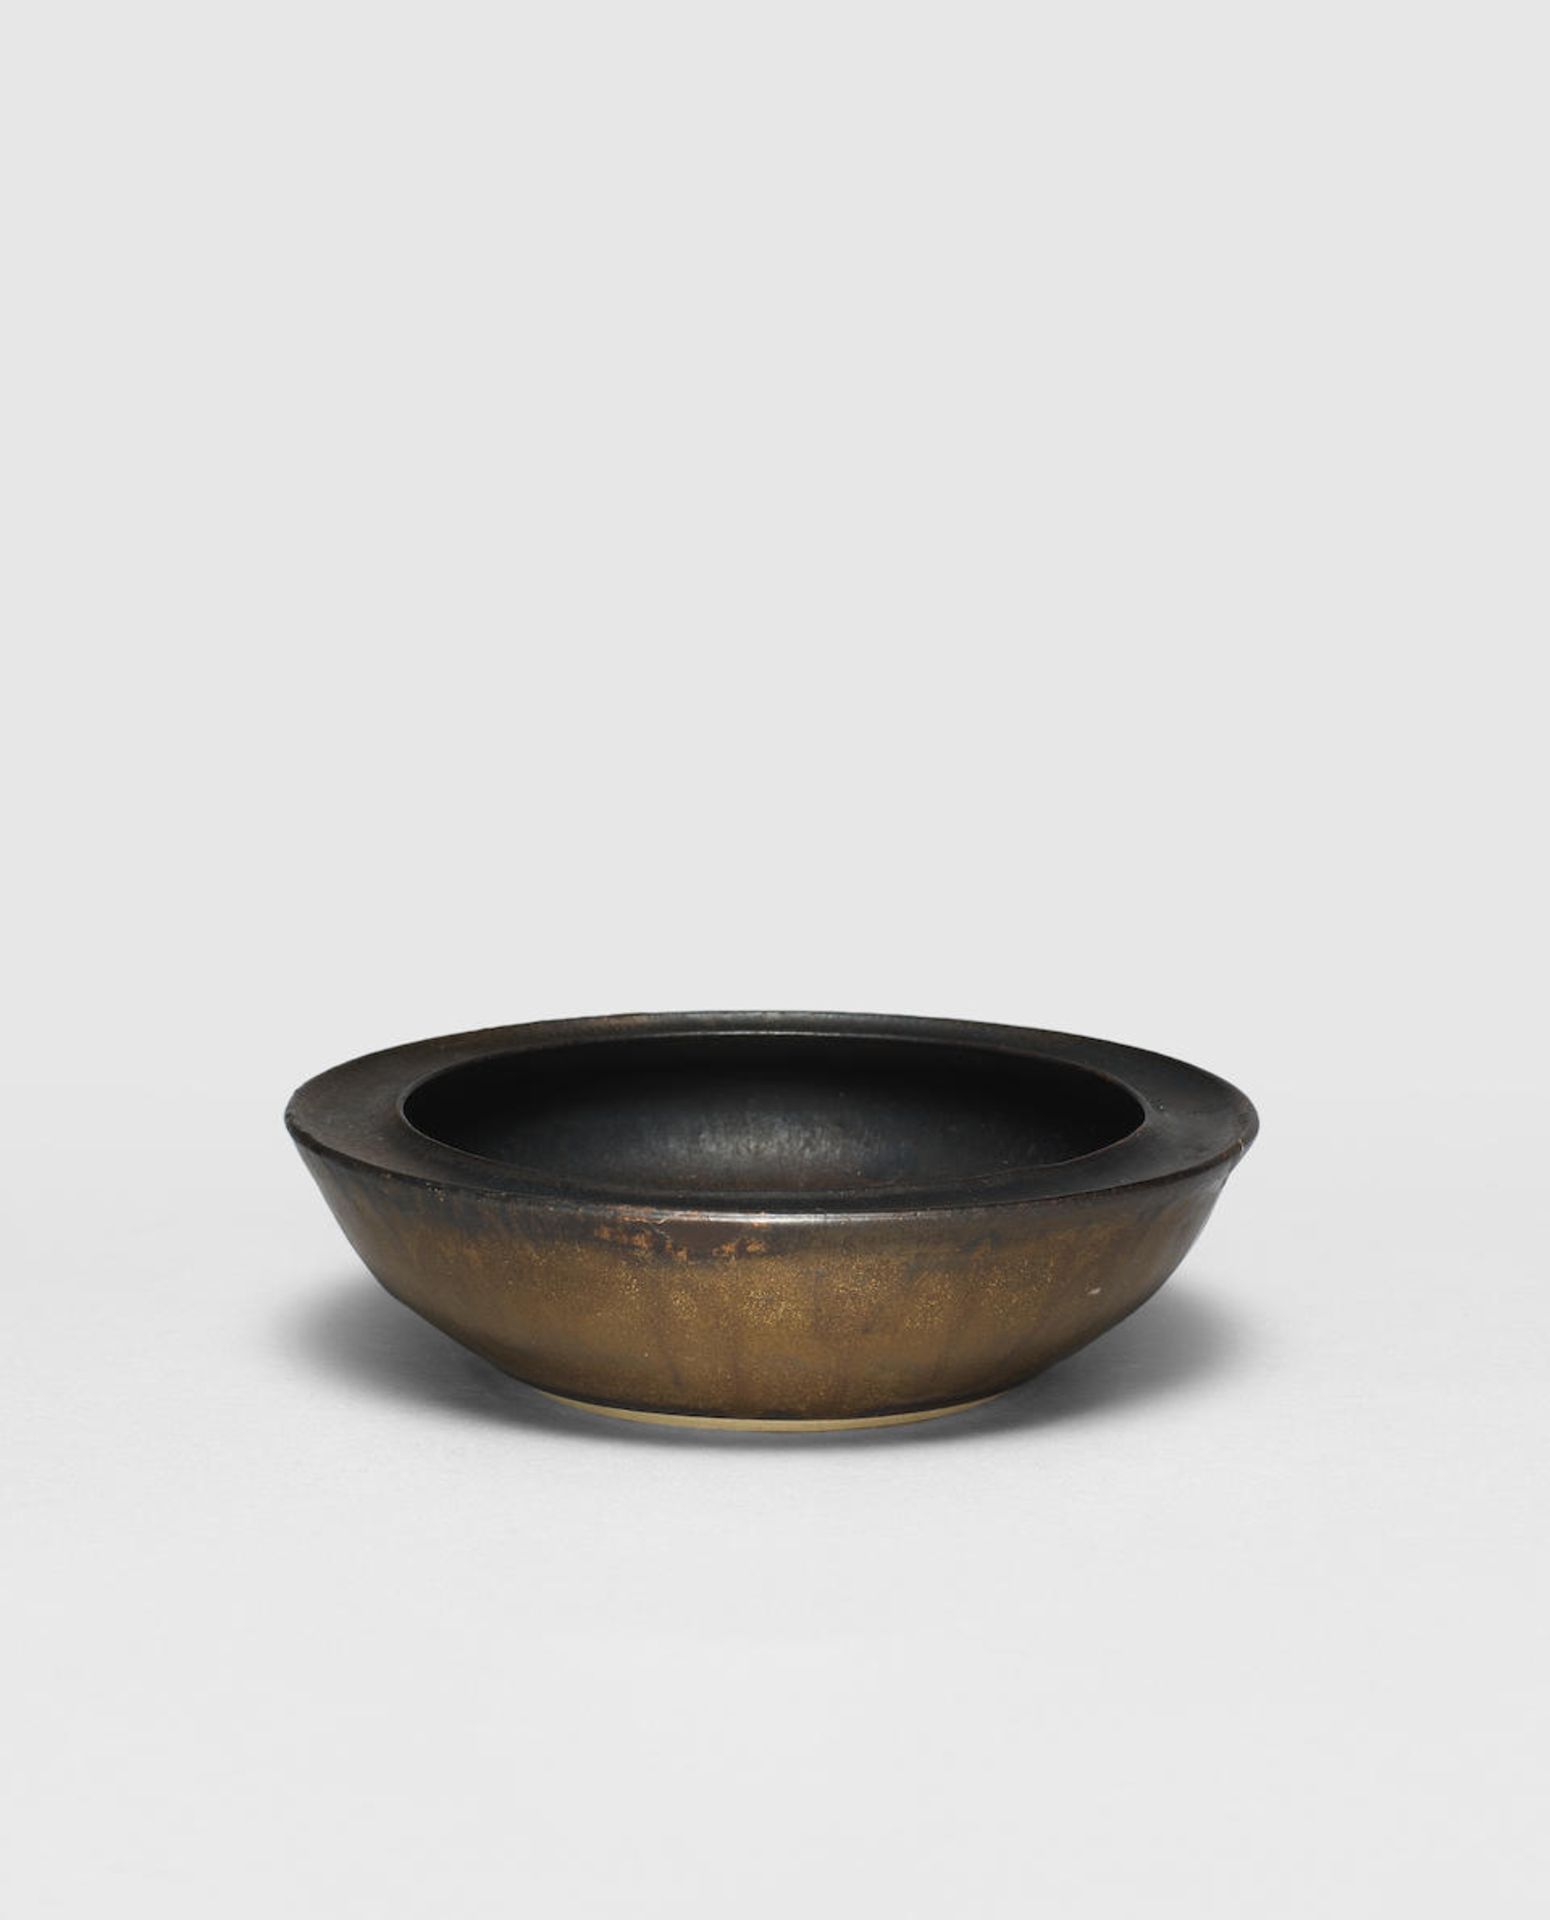 Lucie Rie Ashtray, circa 1972 - Image 2 of 2